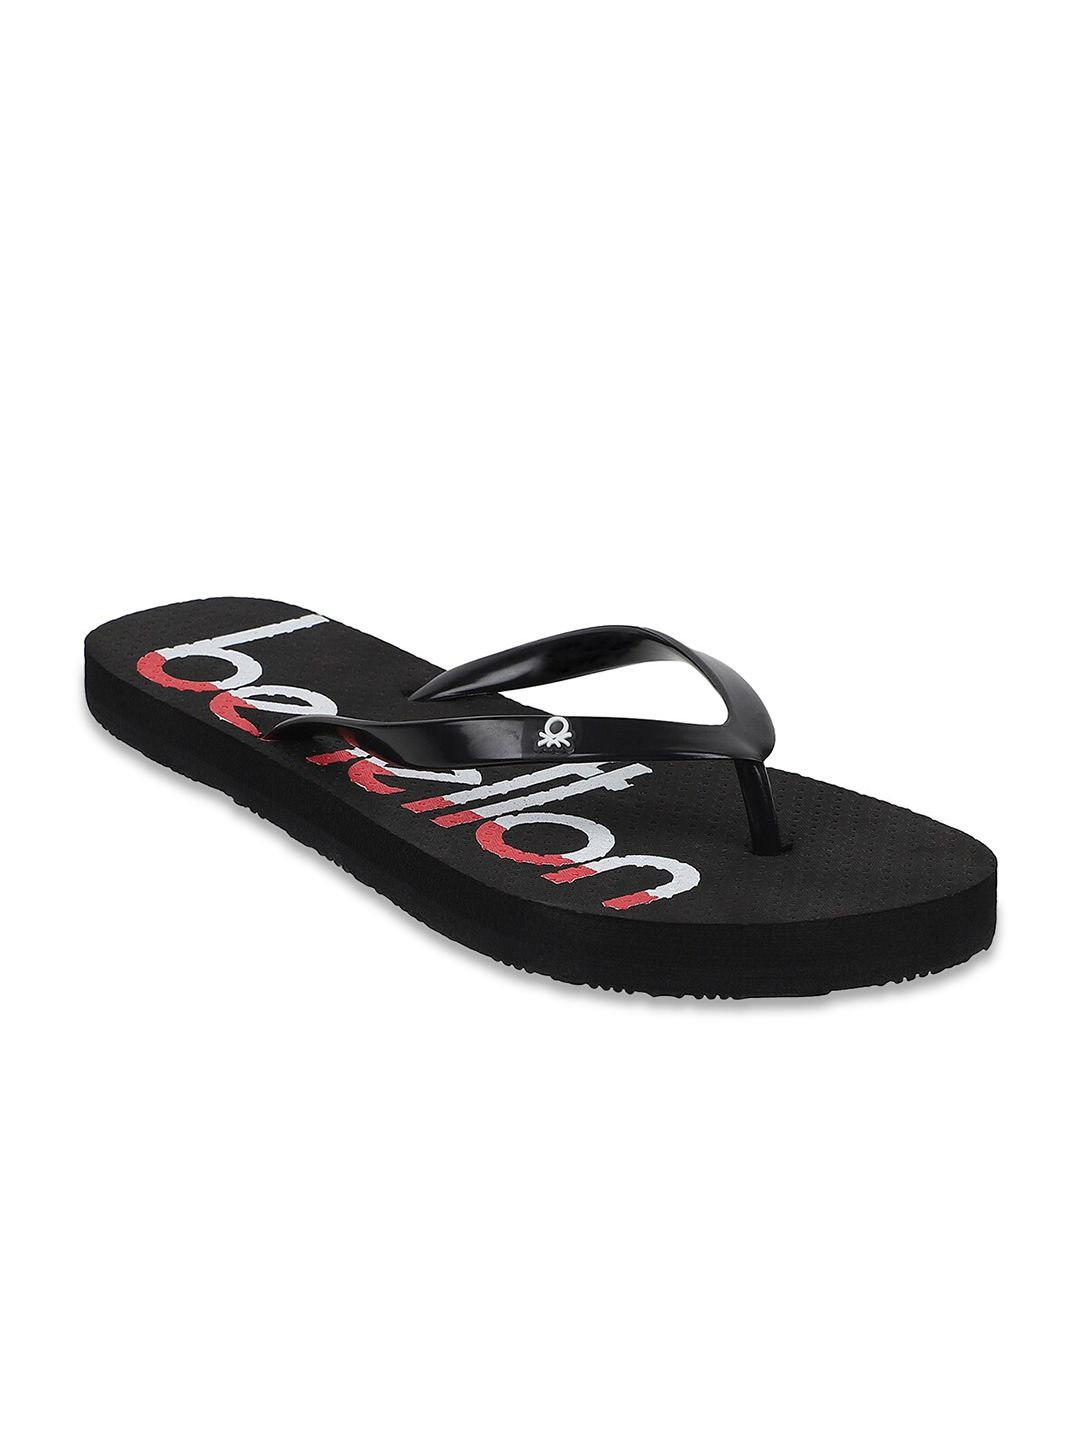 United Colors of Benetton Women Black & White Printed Rubber Thong Flip-Flops Price in India